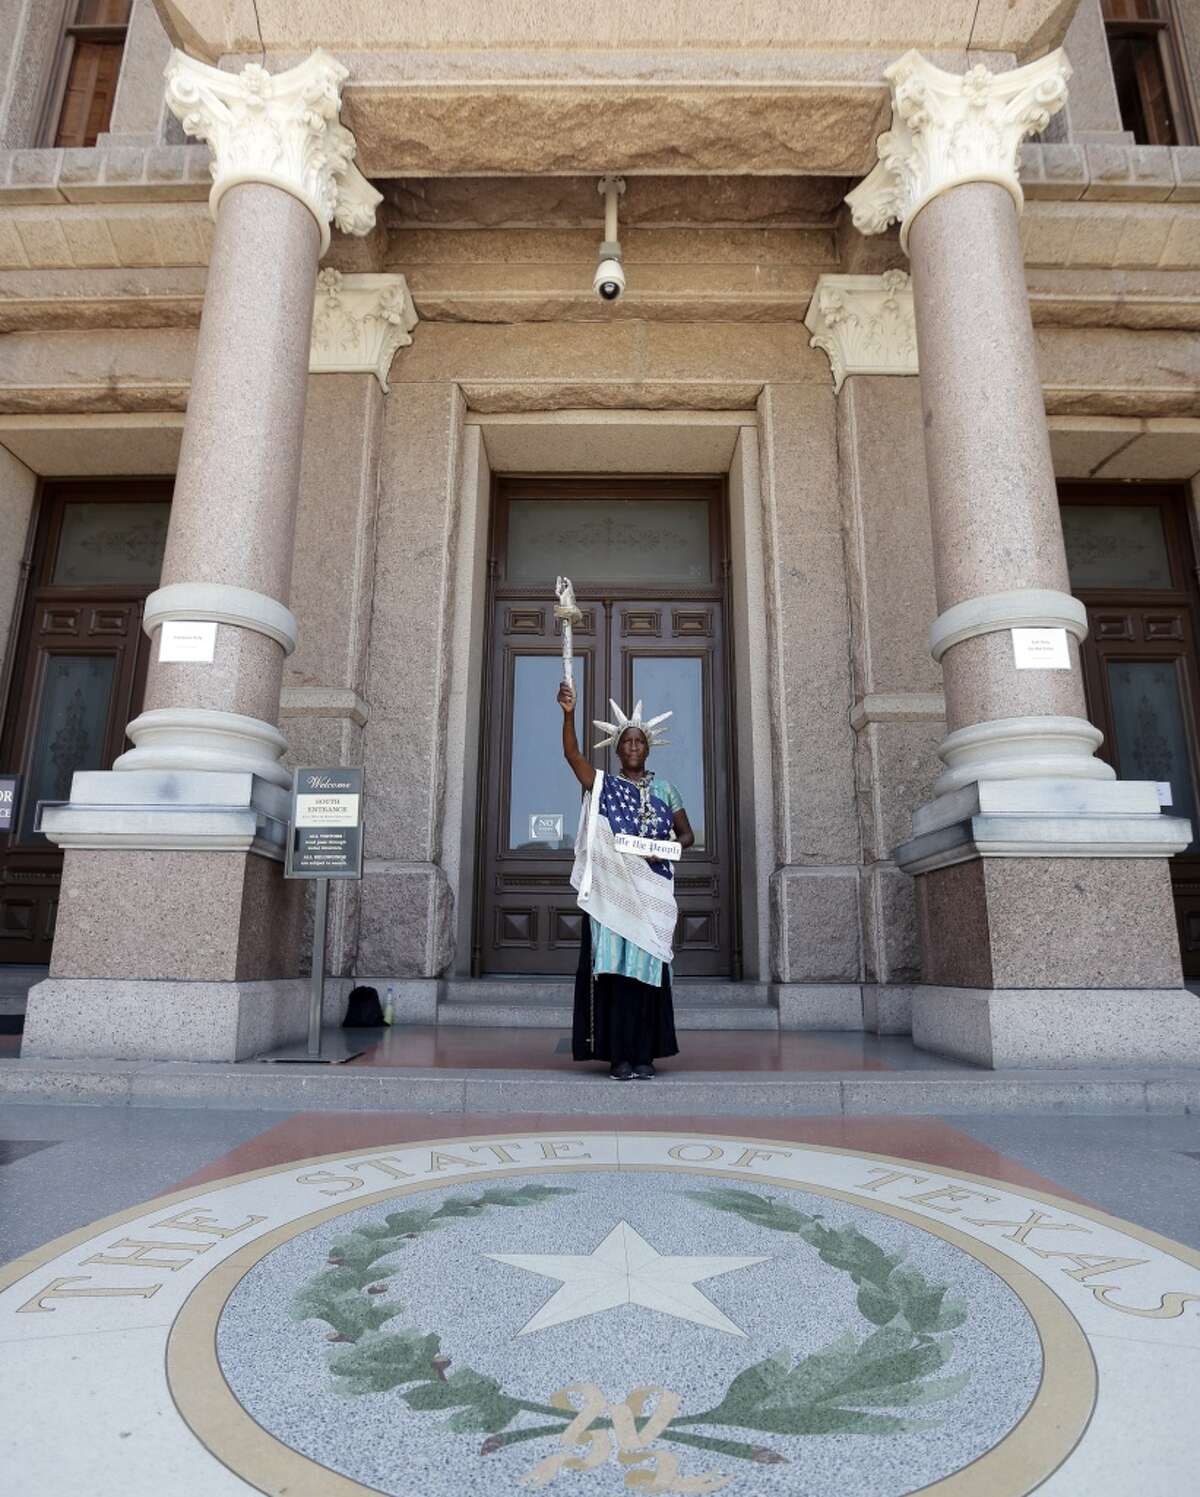 Peace Washington stands outside the Texas Capitol dress as the Statute of Liberty, Wednesday, July 10, 2013, in Austin, Texas. The Texas House approved HB 2 with a third and final vote Wednesday, which would require doctors to have admitting privileges at nearby hospitals, only allow abortions in surgical centers, dictate when abortion pills are taken and ban abortions after 20 weeks. (AP Photo/Eric Gay)